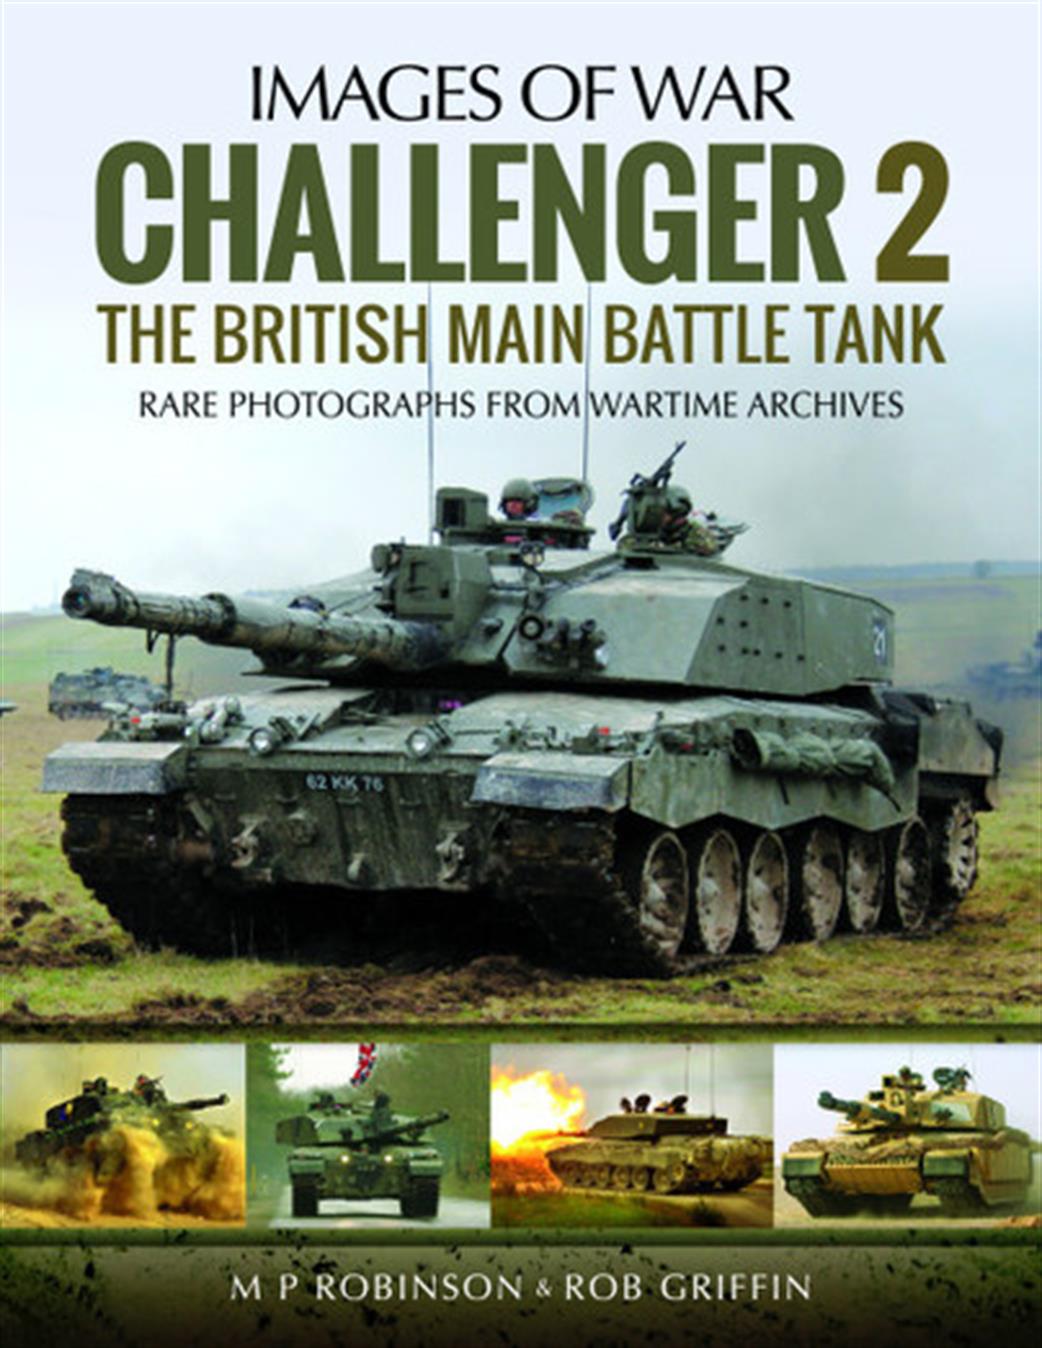 Pen & Sword  9781473896659 Images of War Challenger 2 The British Main Battle Tank Book by M P Robinson & Rob Griffin